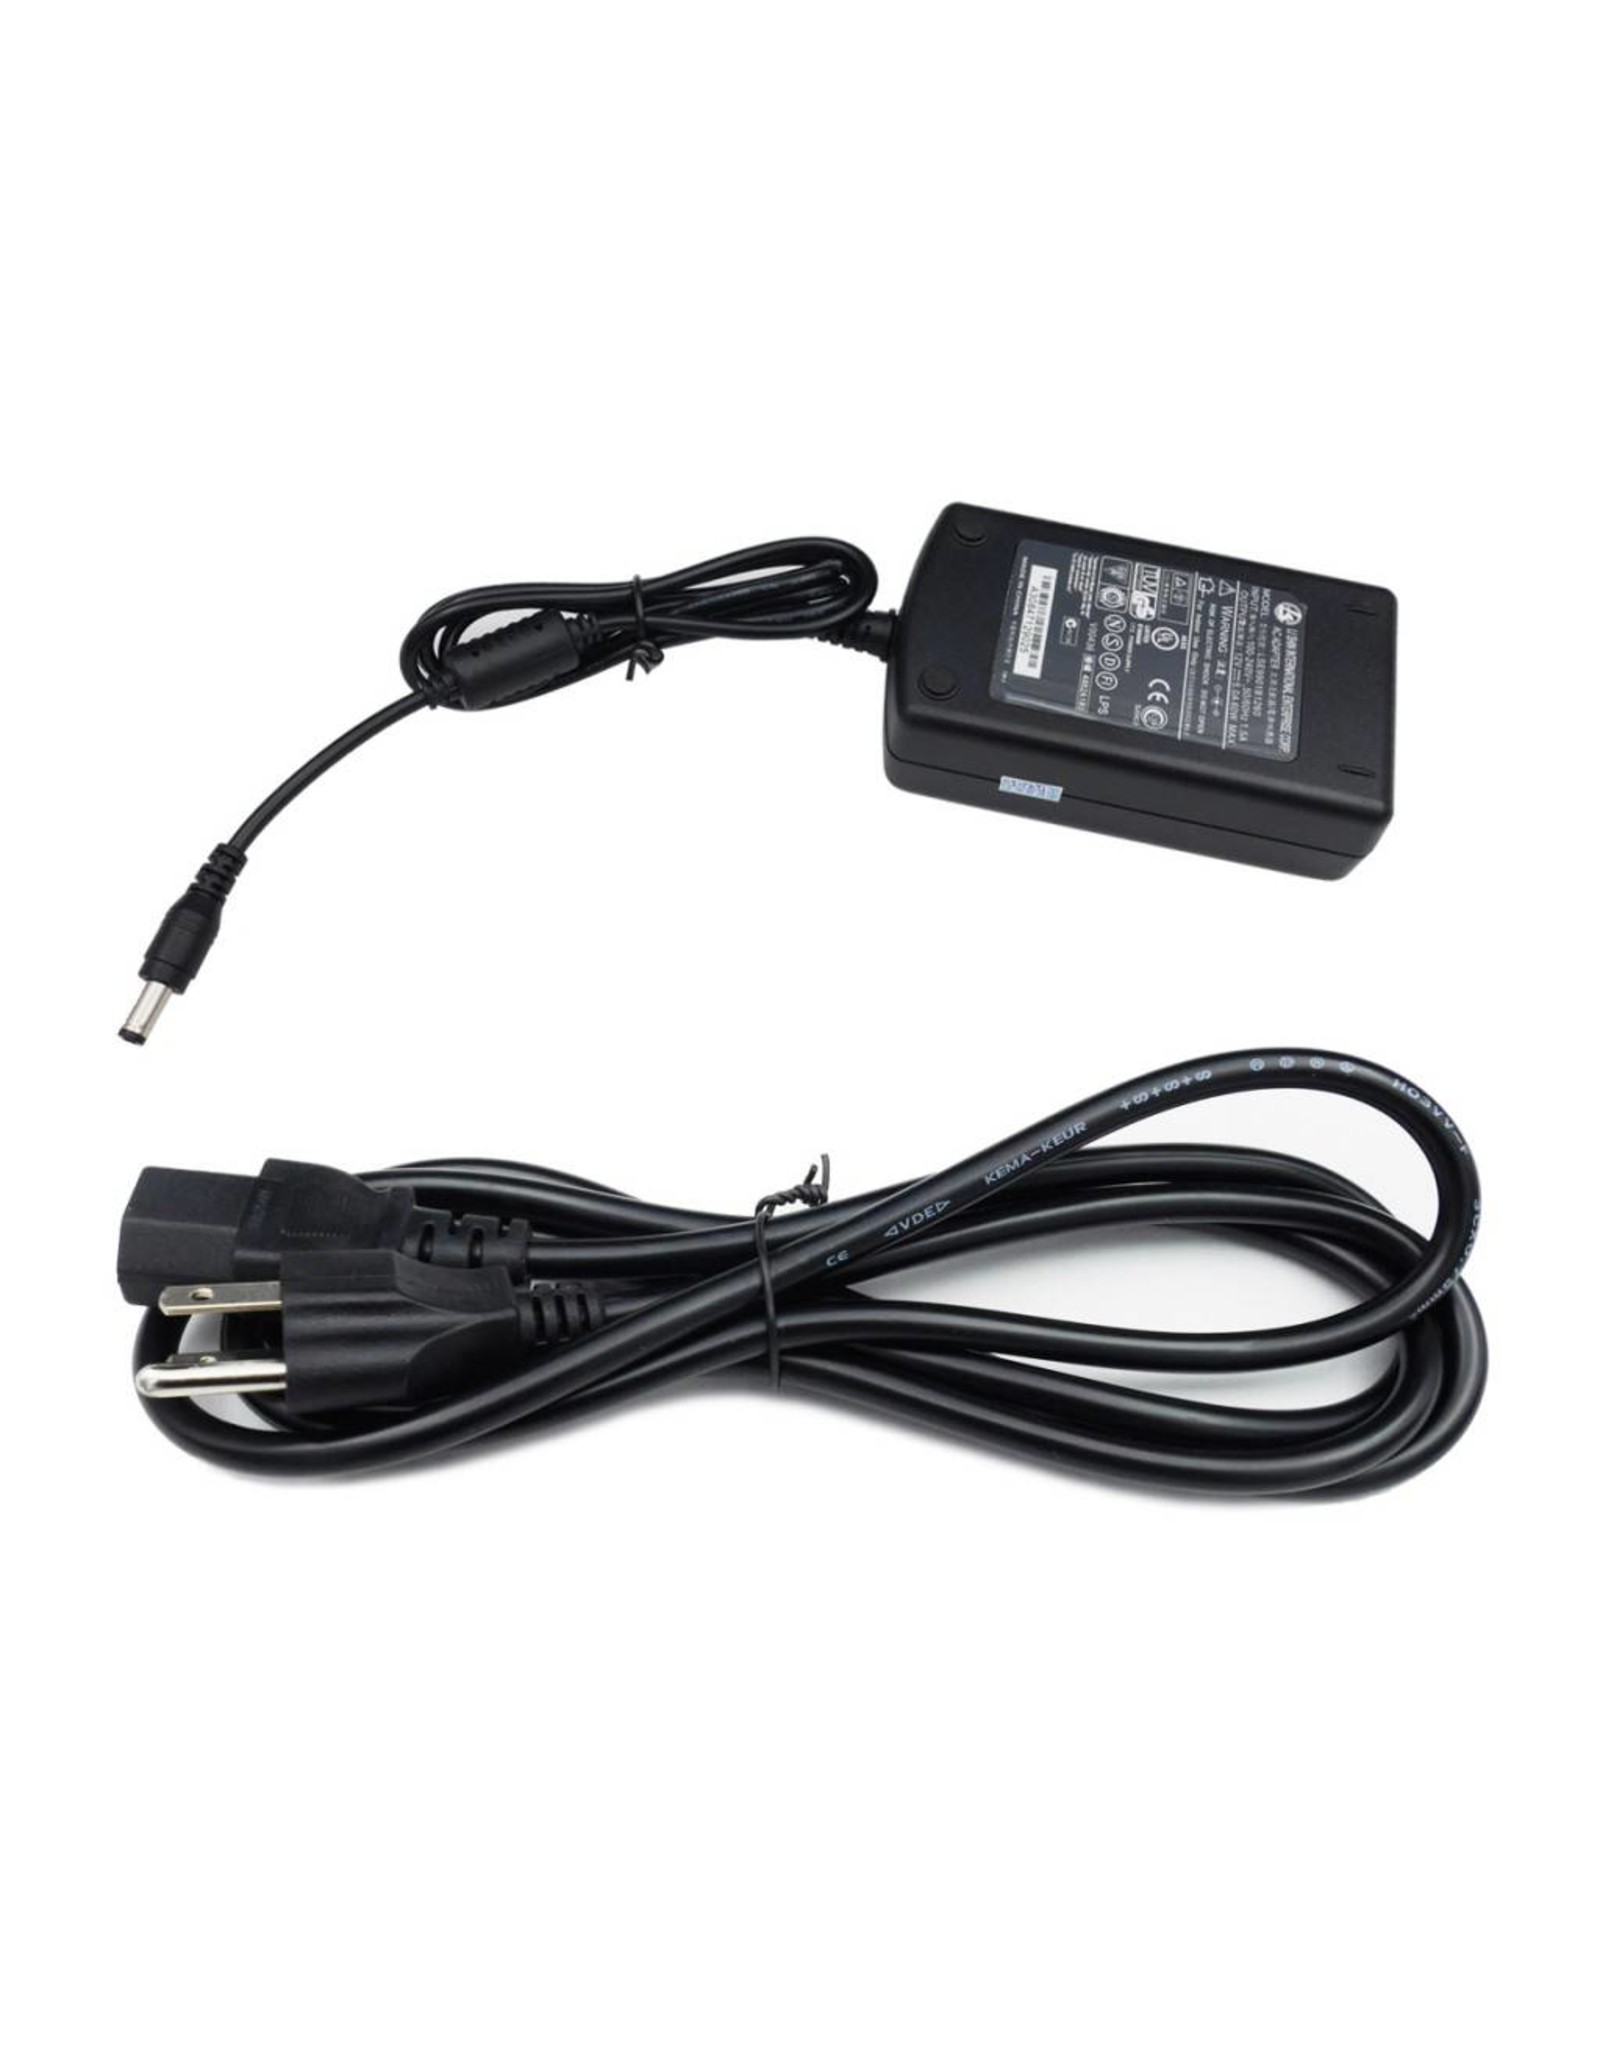 ZWO ZWO 12v 5A AC to DC Adapter for Cooled Cameras (US Standard)